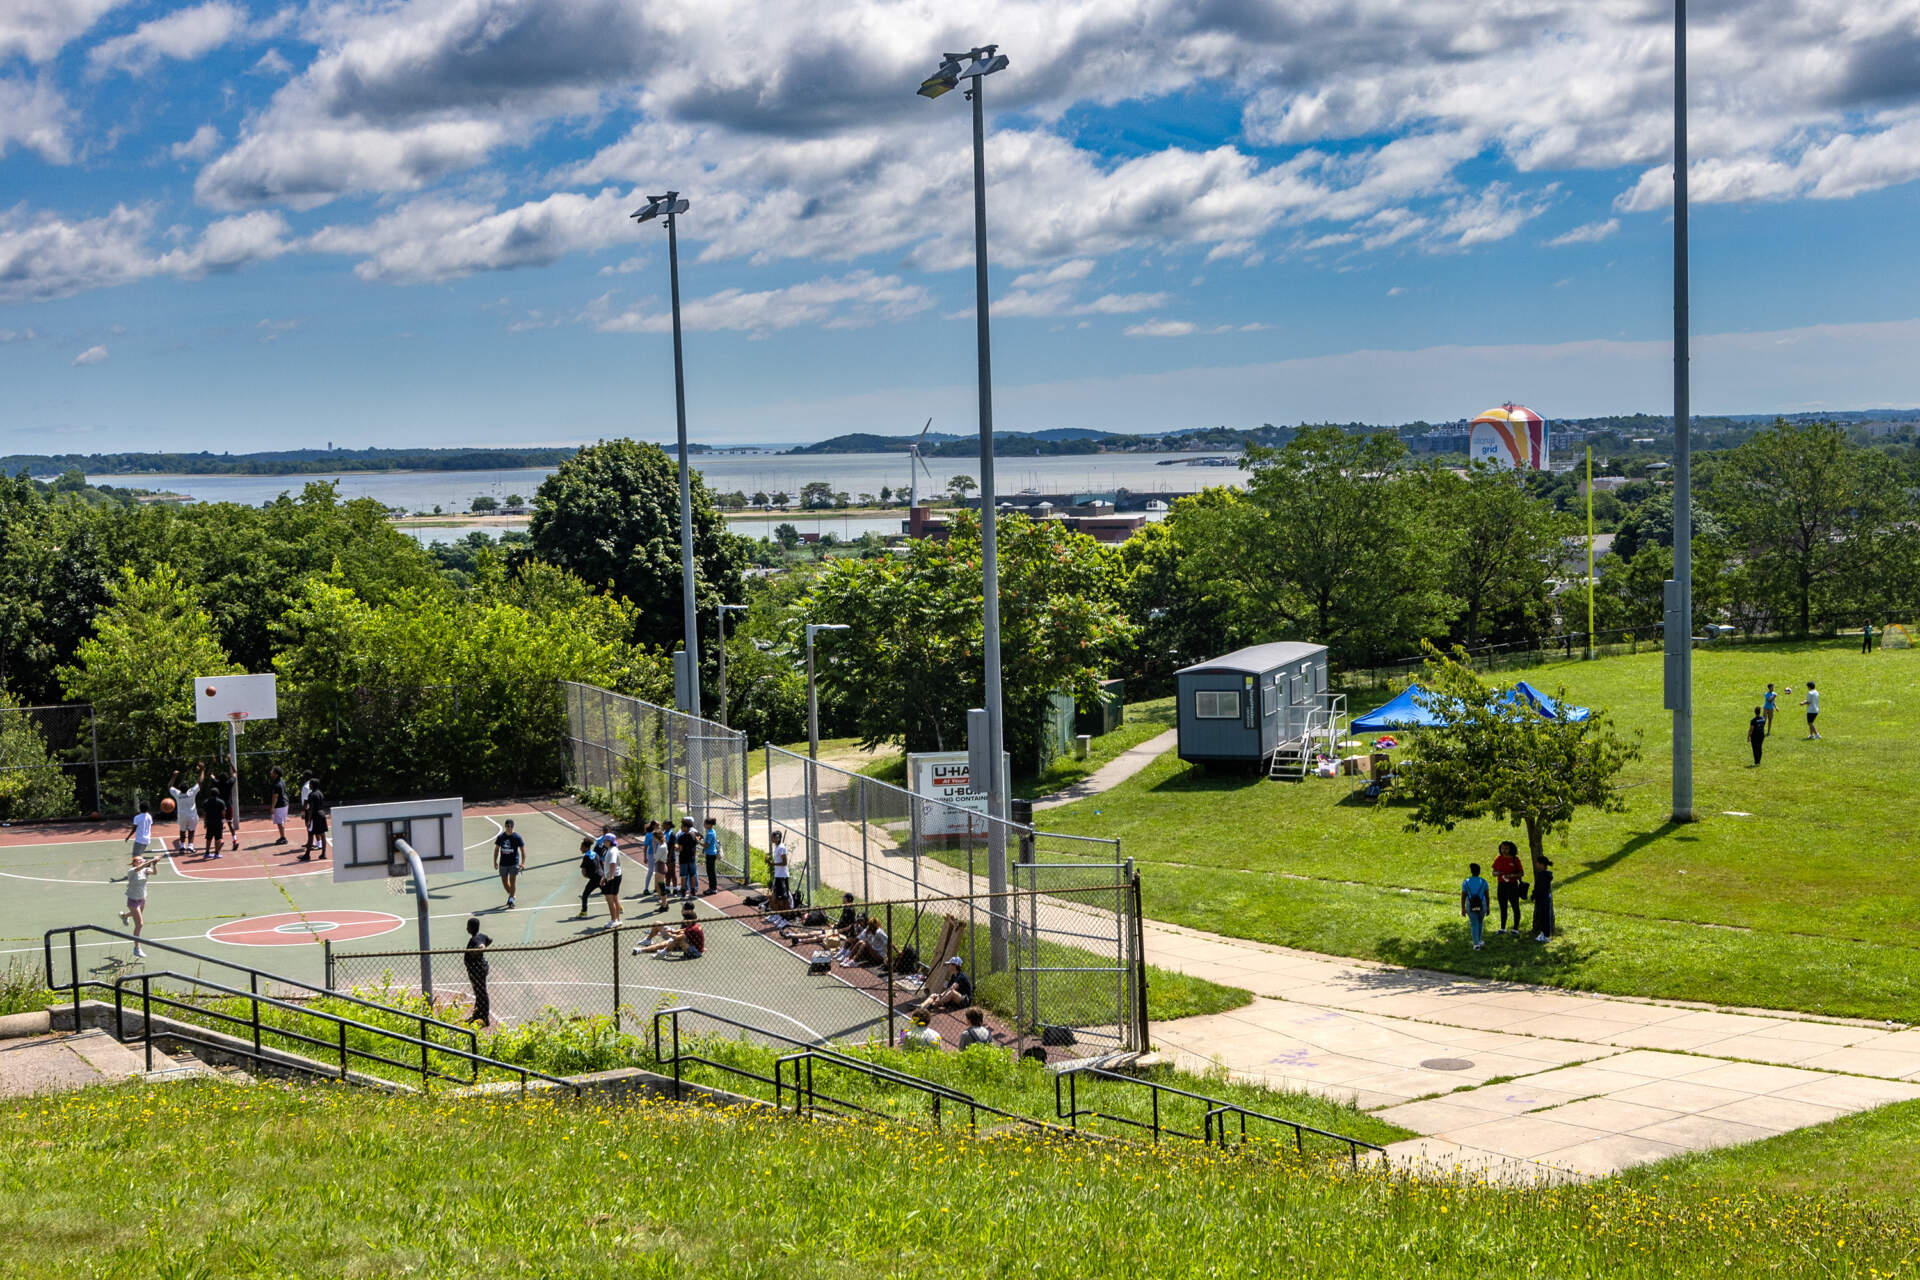 A view of Dorchester Bay while children play at Ronan Park. (Jesse Costa/WBUR)